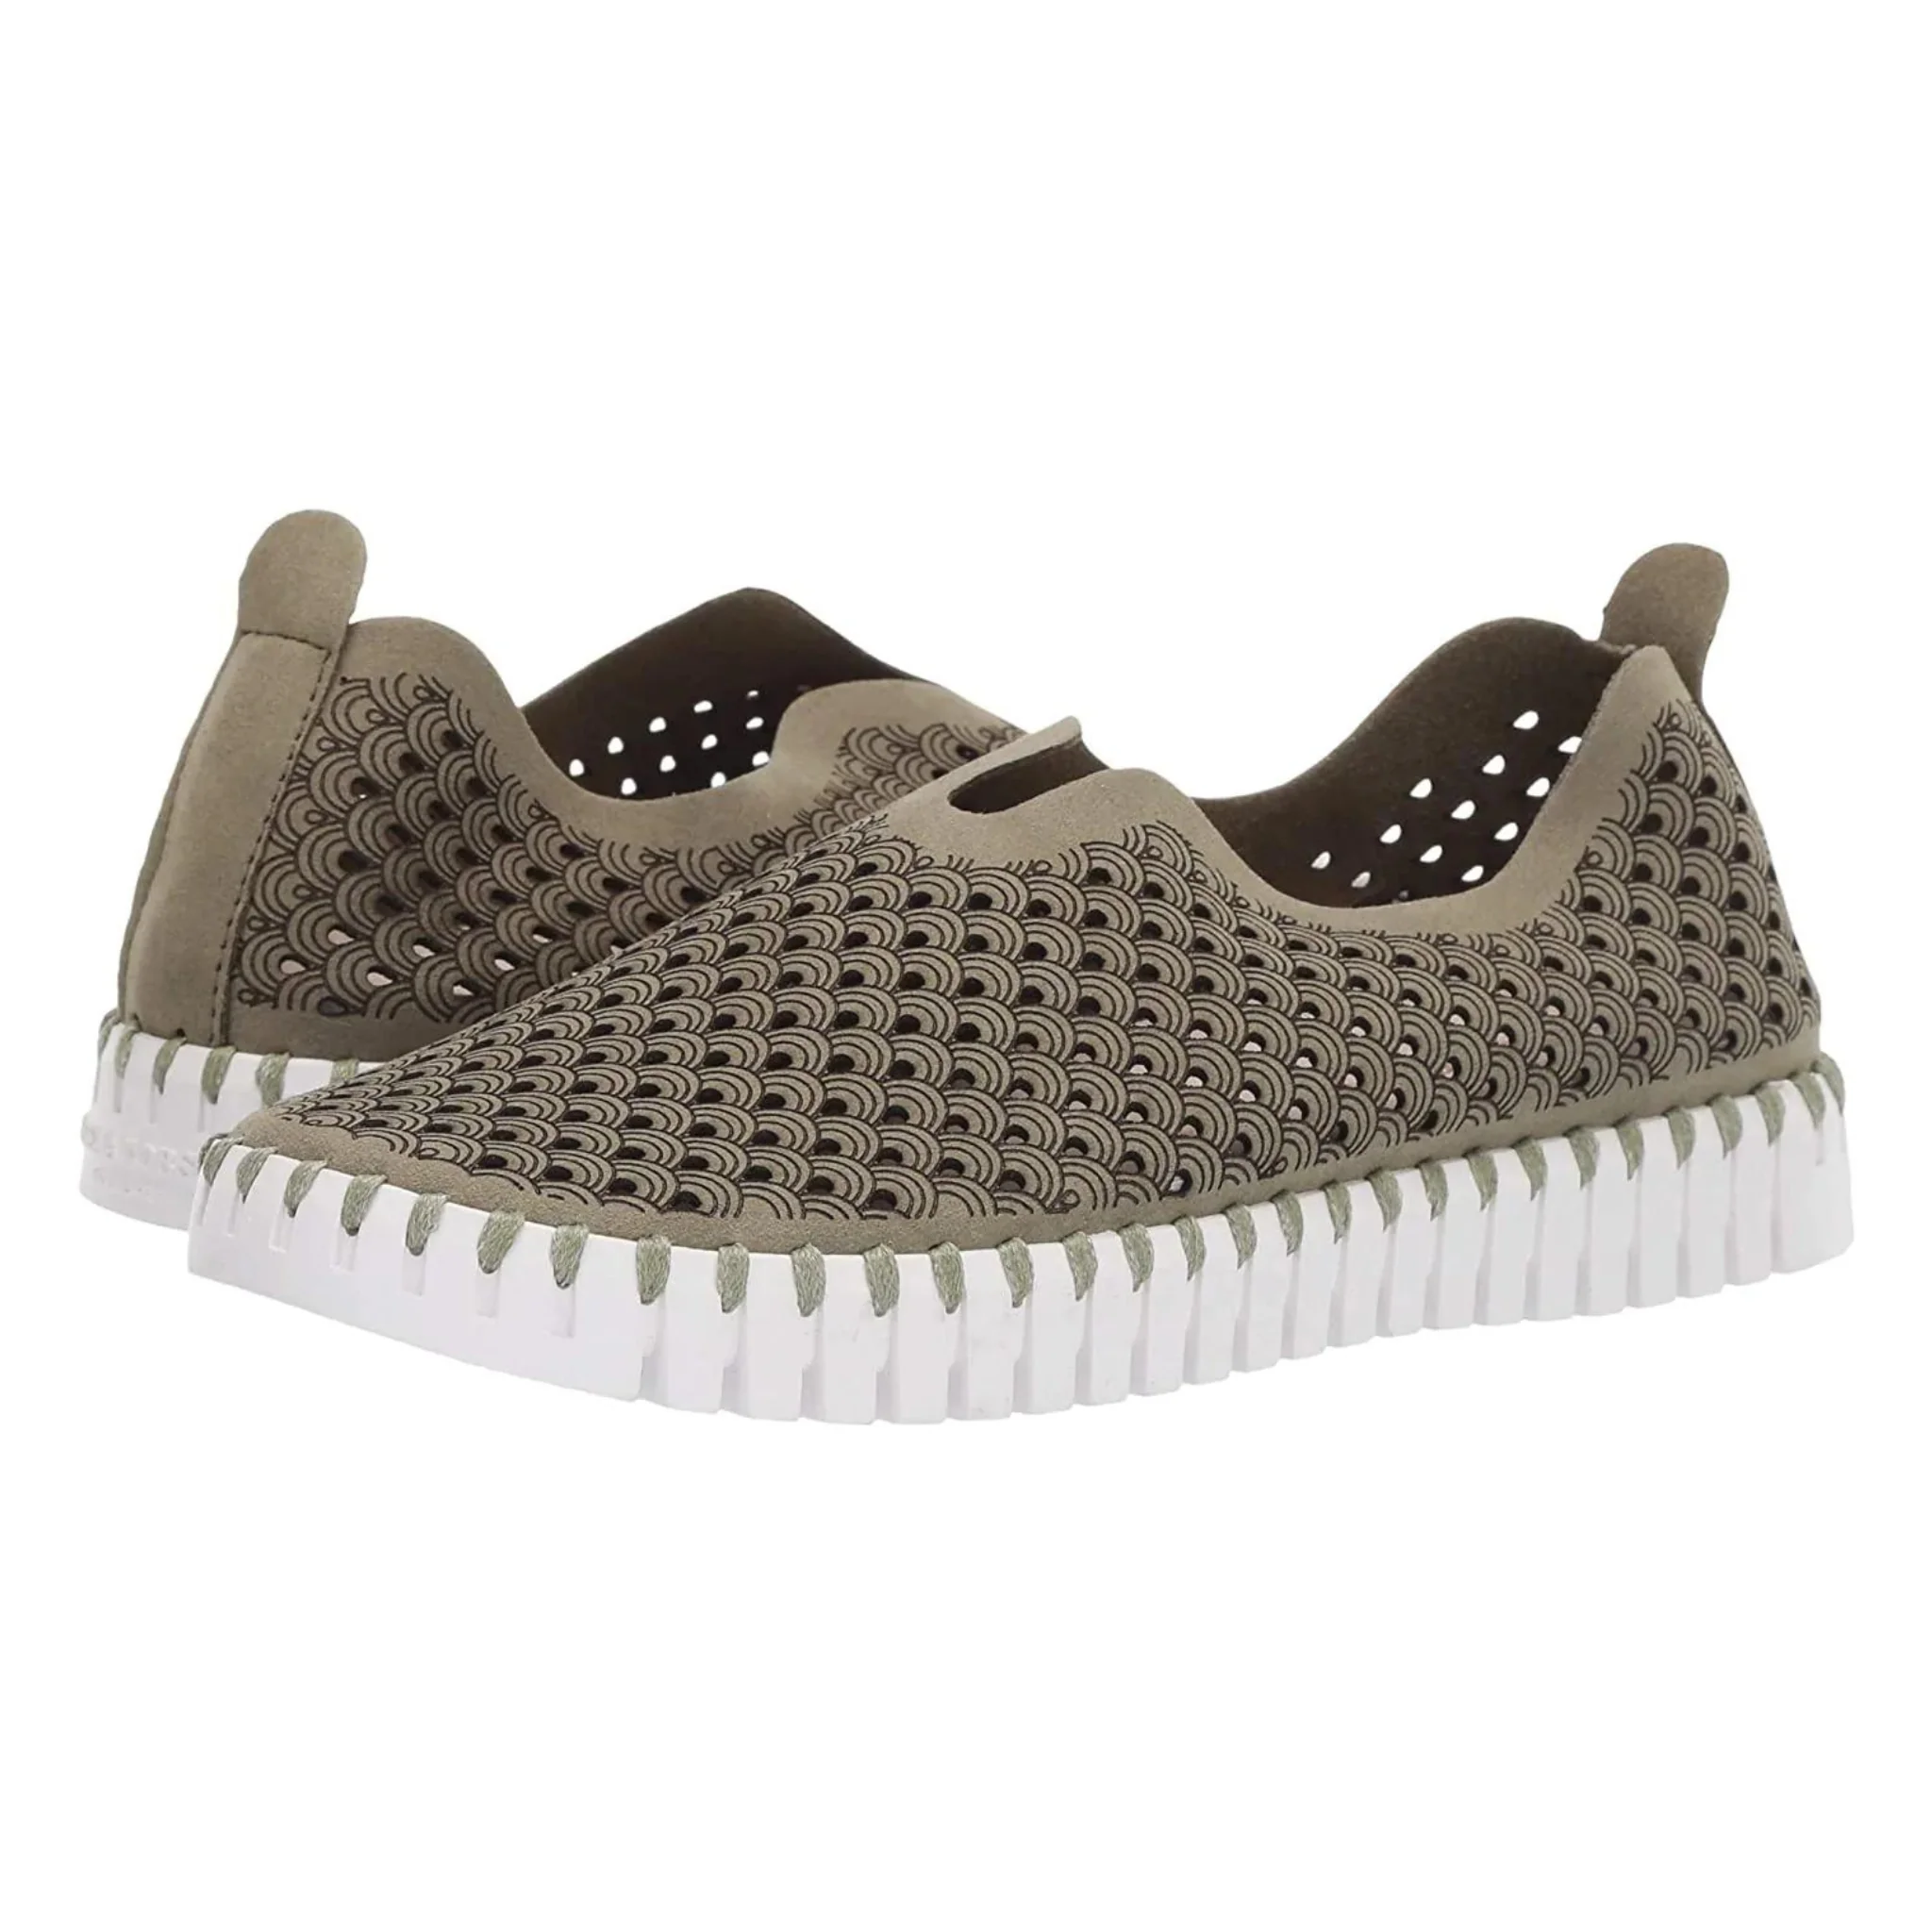 Tulip 139 Perforated Slip-On Sneaker in Army